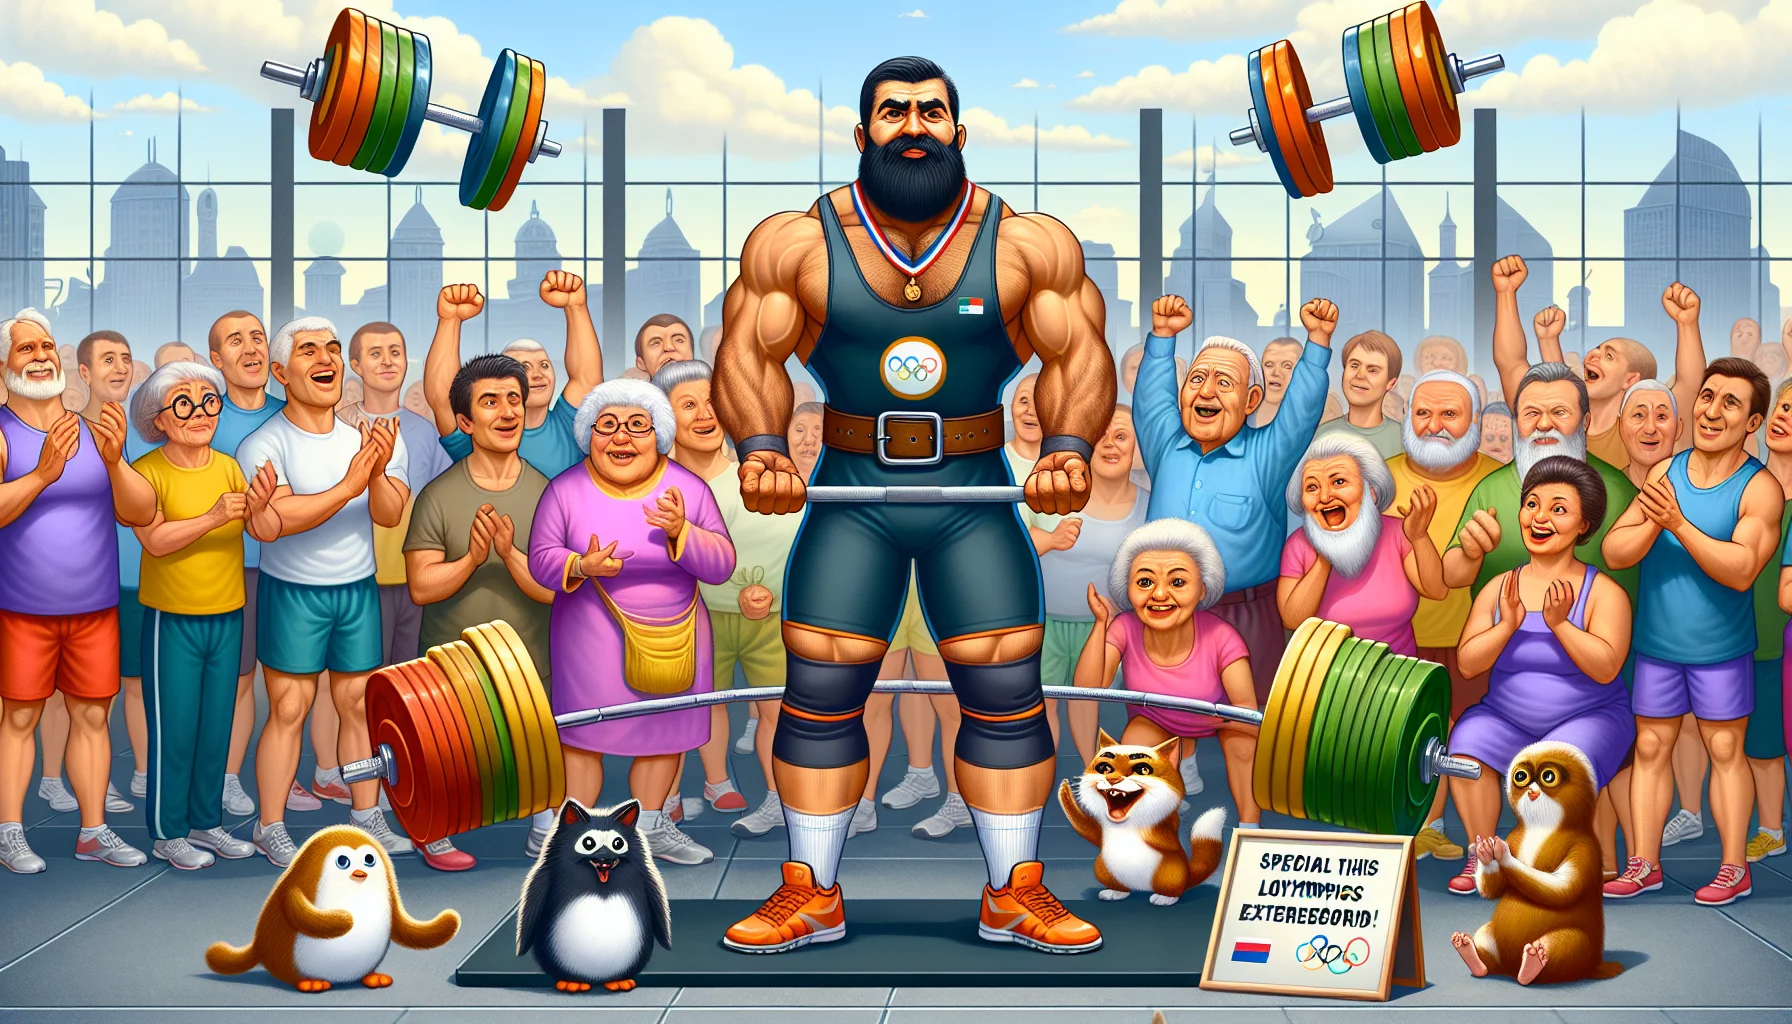 Create a humorous and motivational image that highlights a Special Olympics powerlifting record that encourages people to exercise. Picture this: An exterior gym setting where everyone from all walks of life gazes in awe and cheers on as an strong Hispanic woman and a muscular Middle-Eastern man each set records in powerlifting. Their expressions should be filled with determination and enjoyment. In the background, several fun elements such as talking dumbbells encouraging the onlookers to join in, a burly cat demonstrating push-ups, and a group of elderly penguins in colorful sports gear cheerleading enthusiastically to add humor and whimsy to the entire setting.